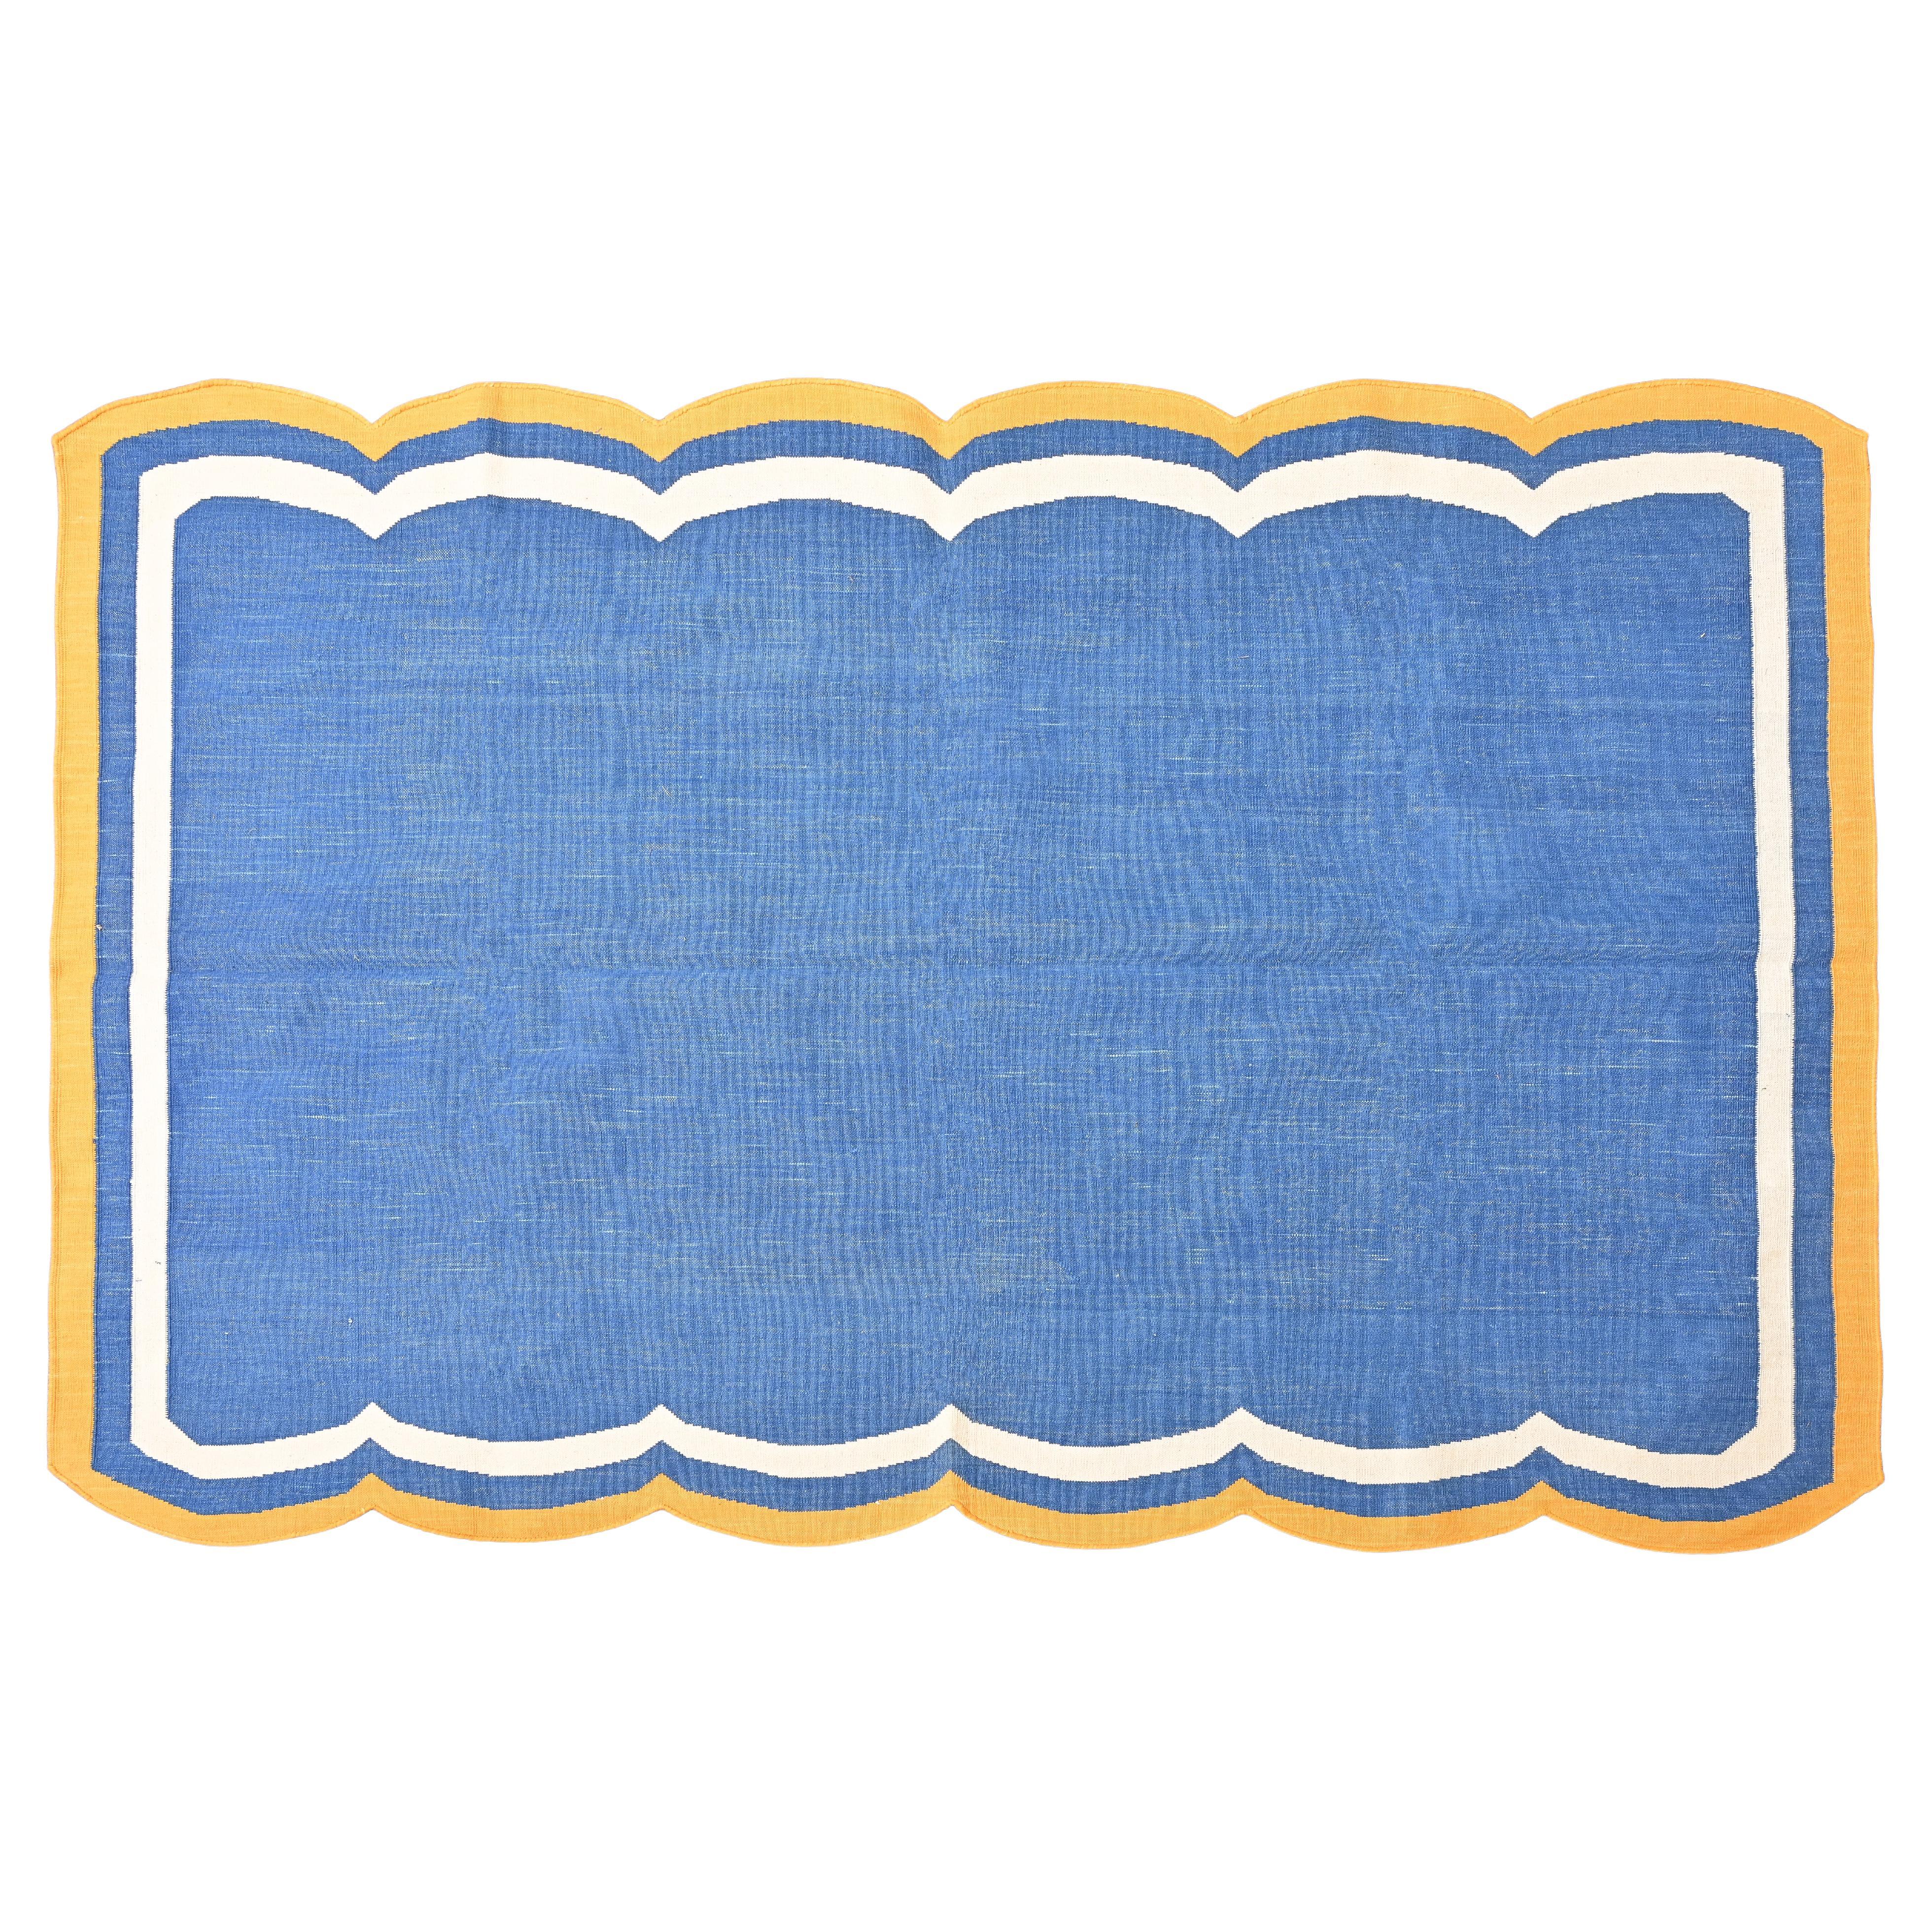 Handmade Cotton Area Flat Weave Rug, 4x6 Blue And Yellow Scallop Indian Dhurrie For Sale